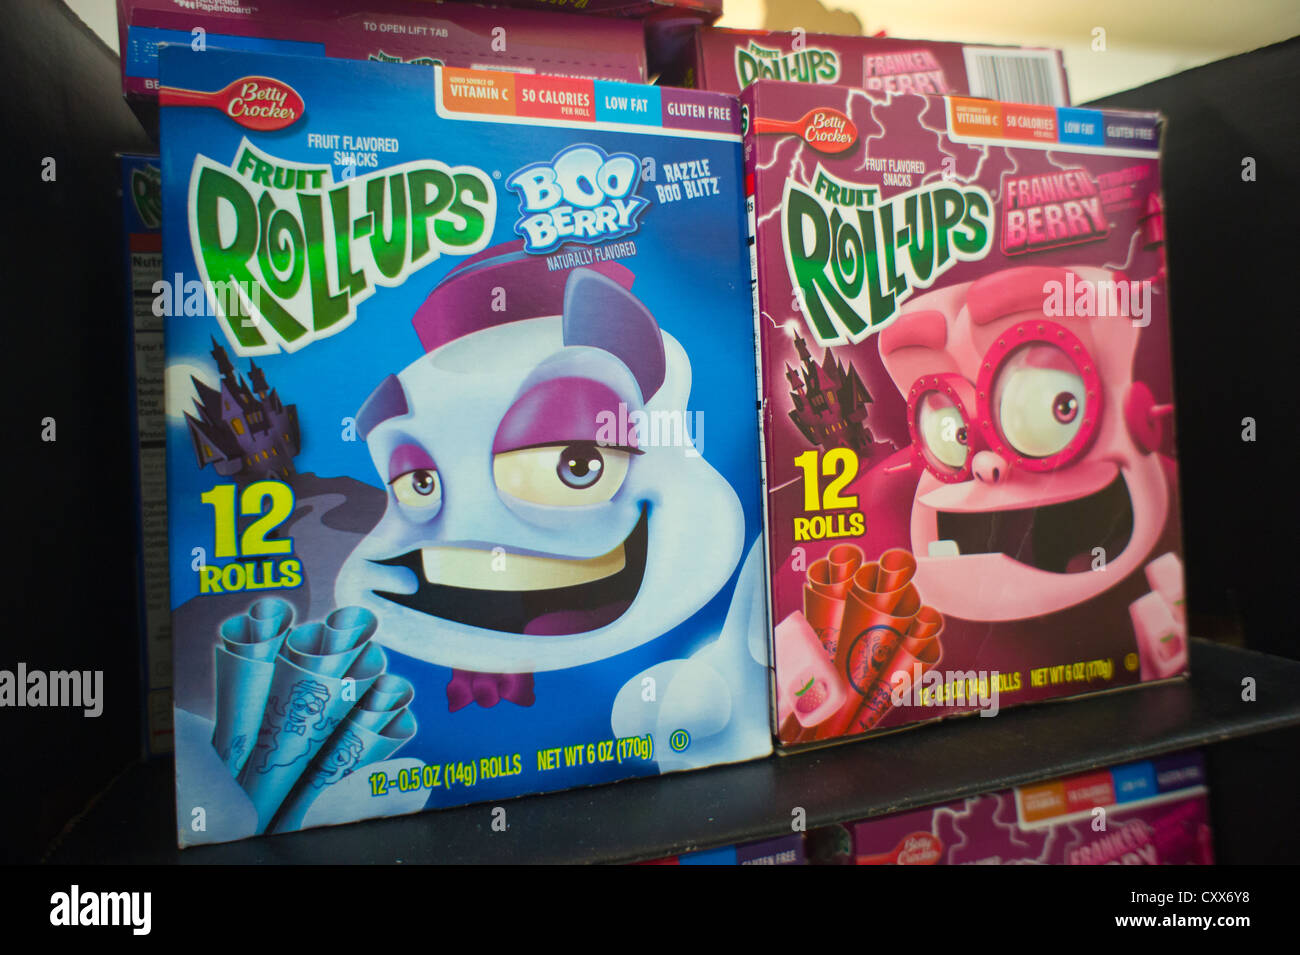 Boxes of General Mills Roll-ups featuring cartoon characters Frankenberry and Booberry on supermarket shelves Stock Photo